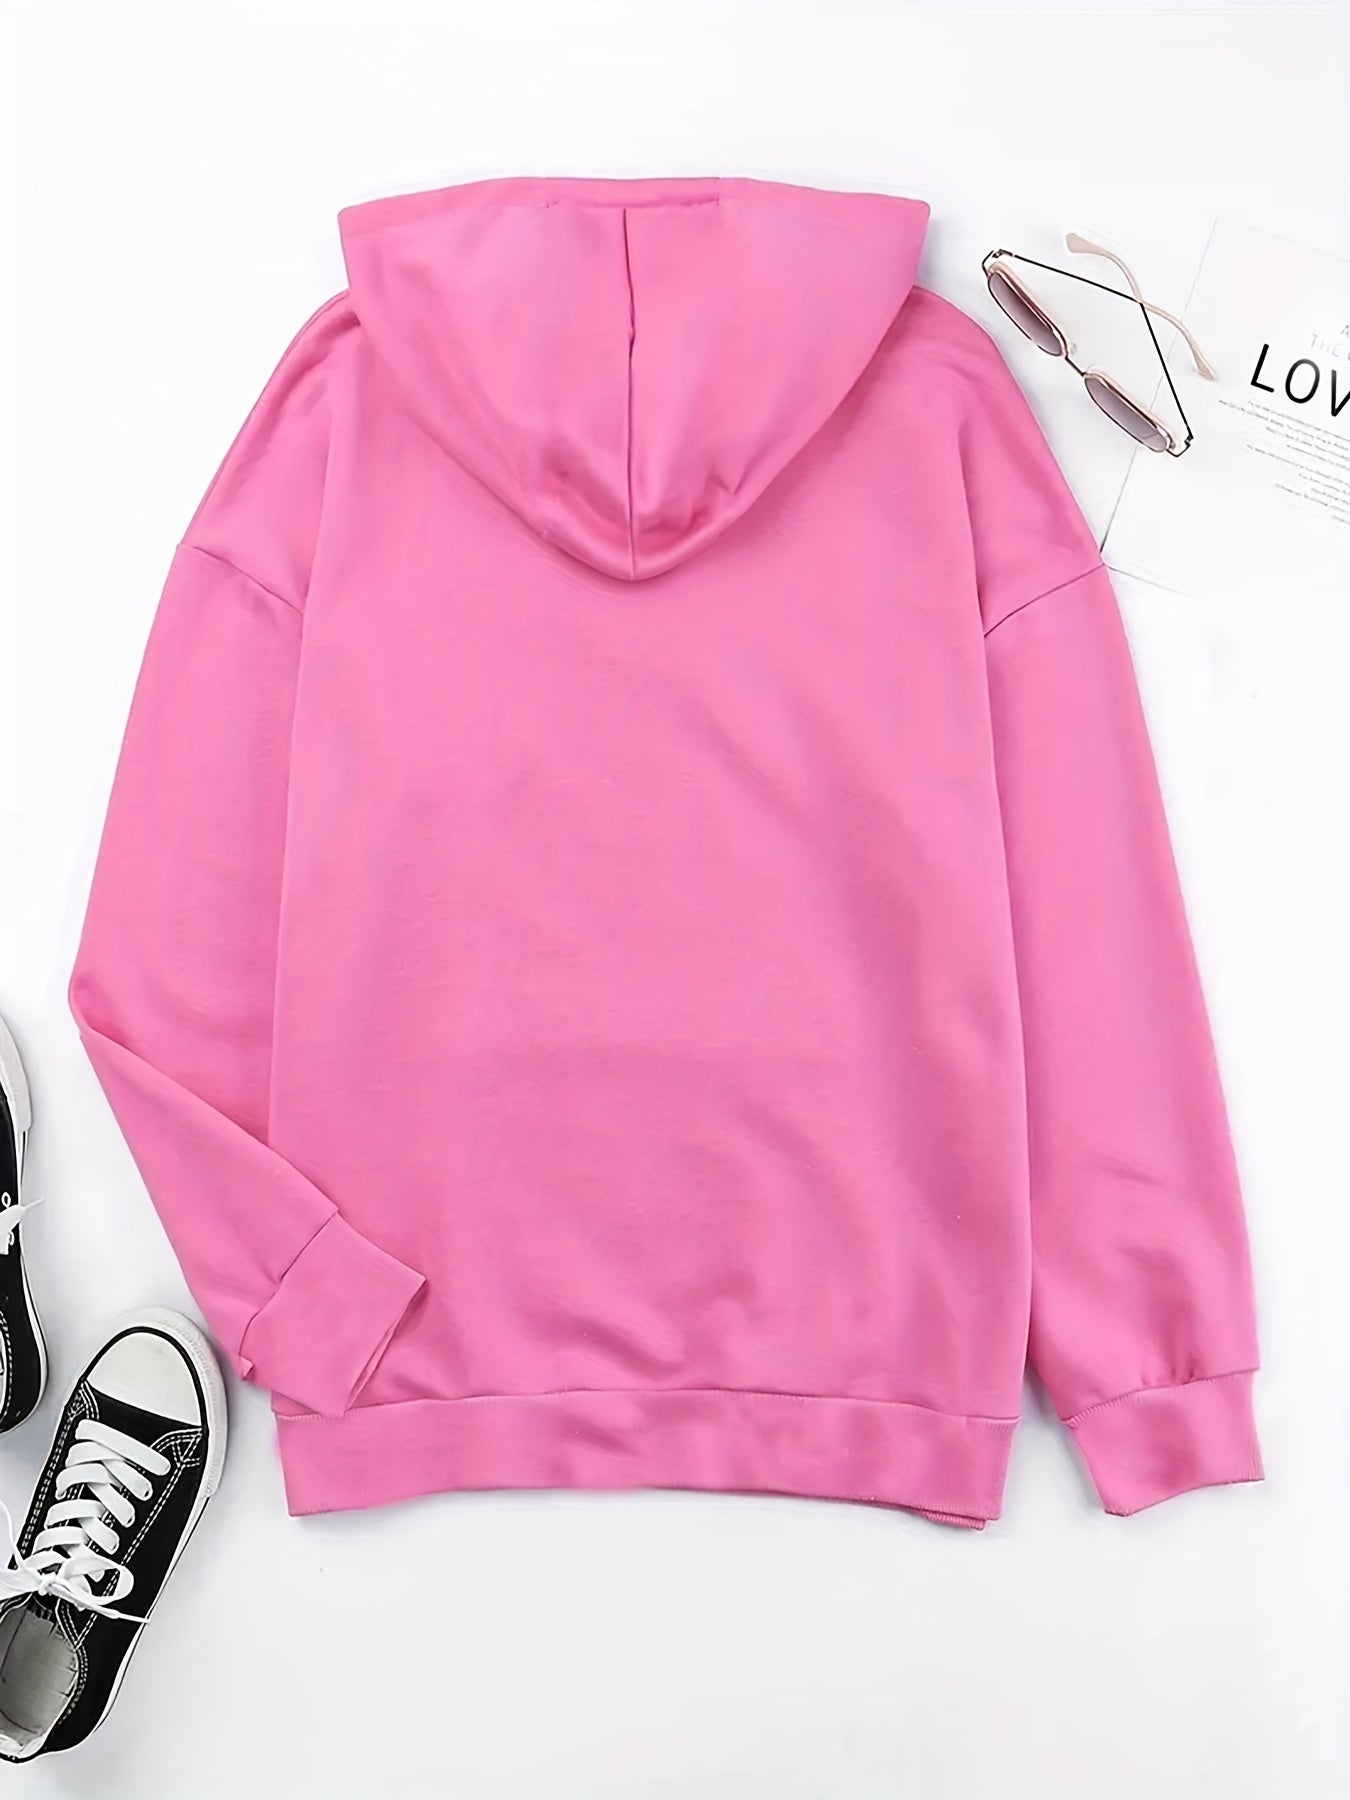 Plus Size Casual Sweatshirt, Women's Plus Solid Cut Out Long Sleeve Slight Stretch Drawstring Hoodie With Pocket